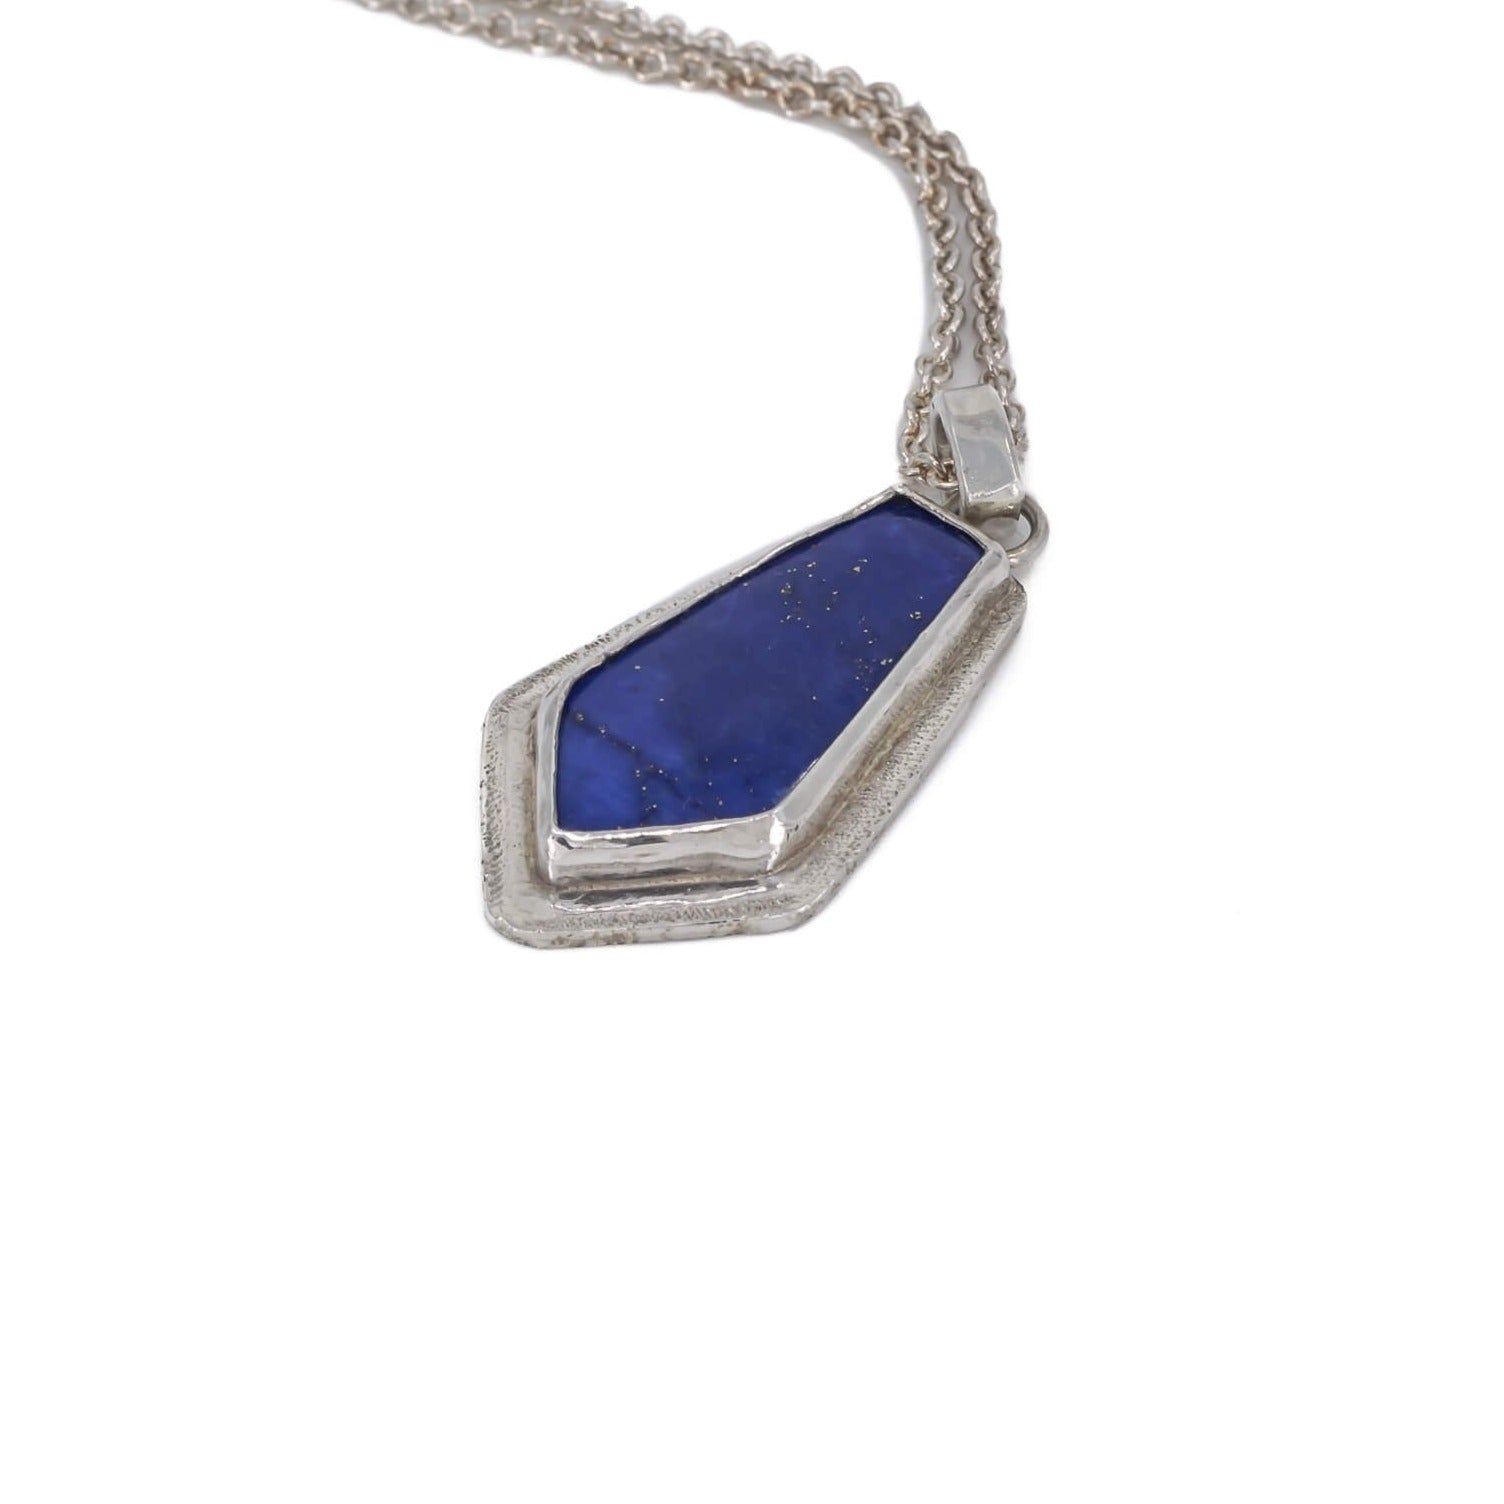 Lapis lazuli kite shaped pendant necklace in sterling silver with a star dust textured border hanging on a cable chain side view